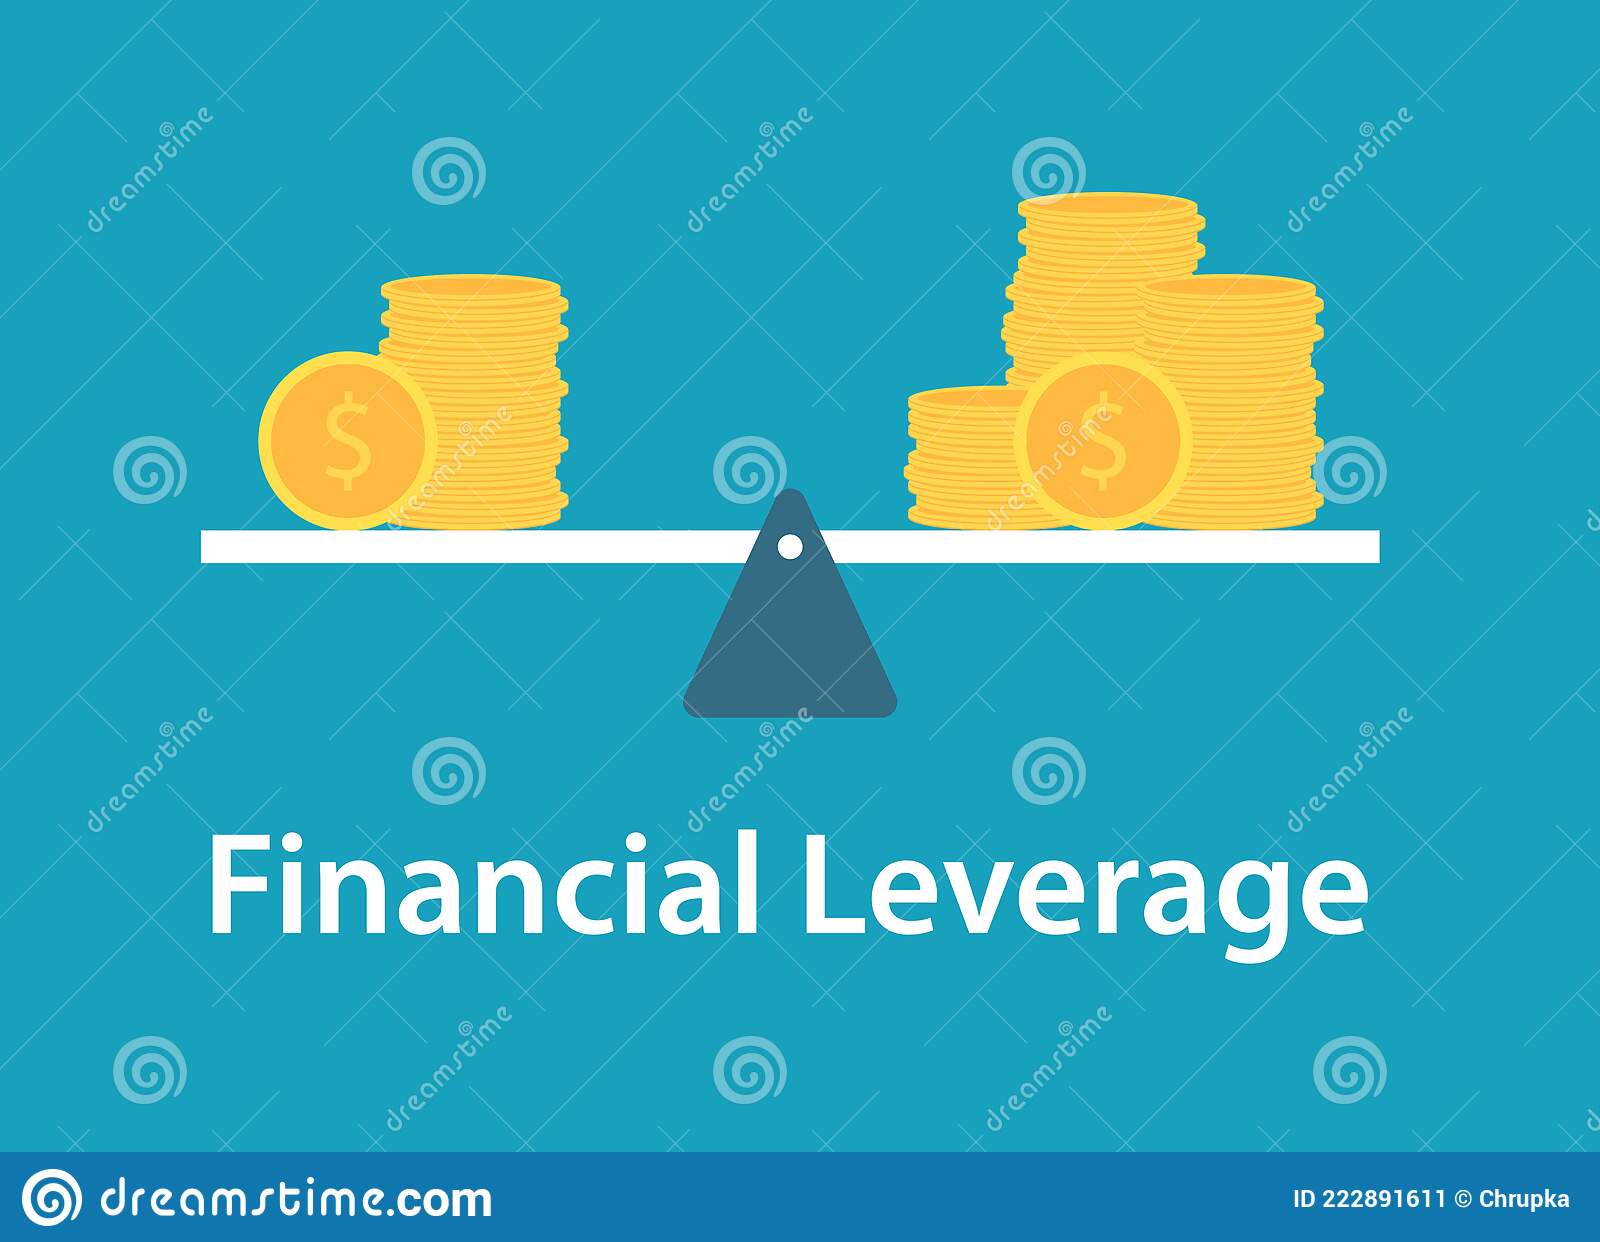 What is financial leverage?